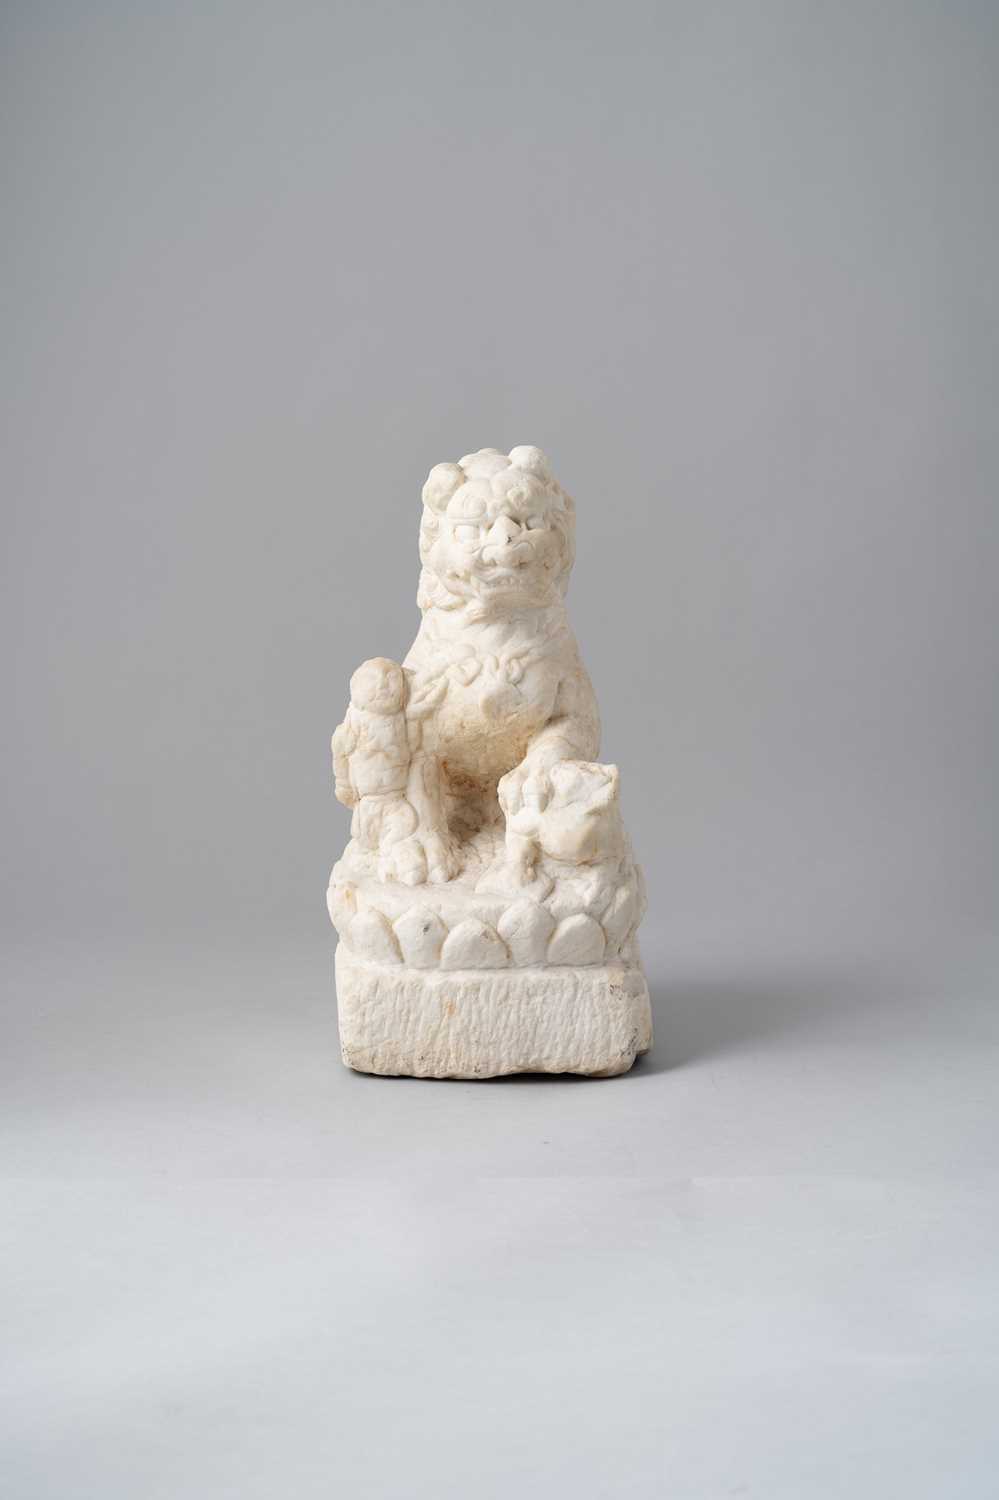 NO RESERVE A CHINESE MARBLE FIGURE OF A BUDDHIST LION TANG/SONG DYNASTY Seated with a boy standing